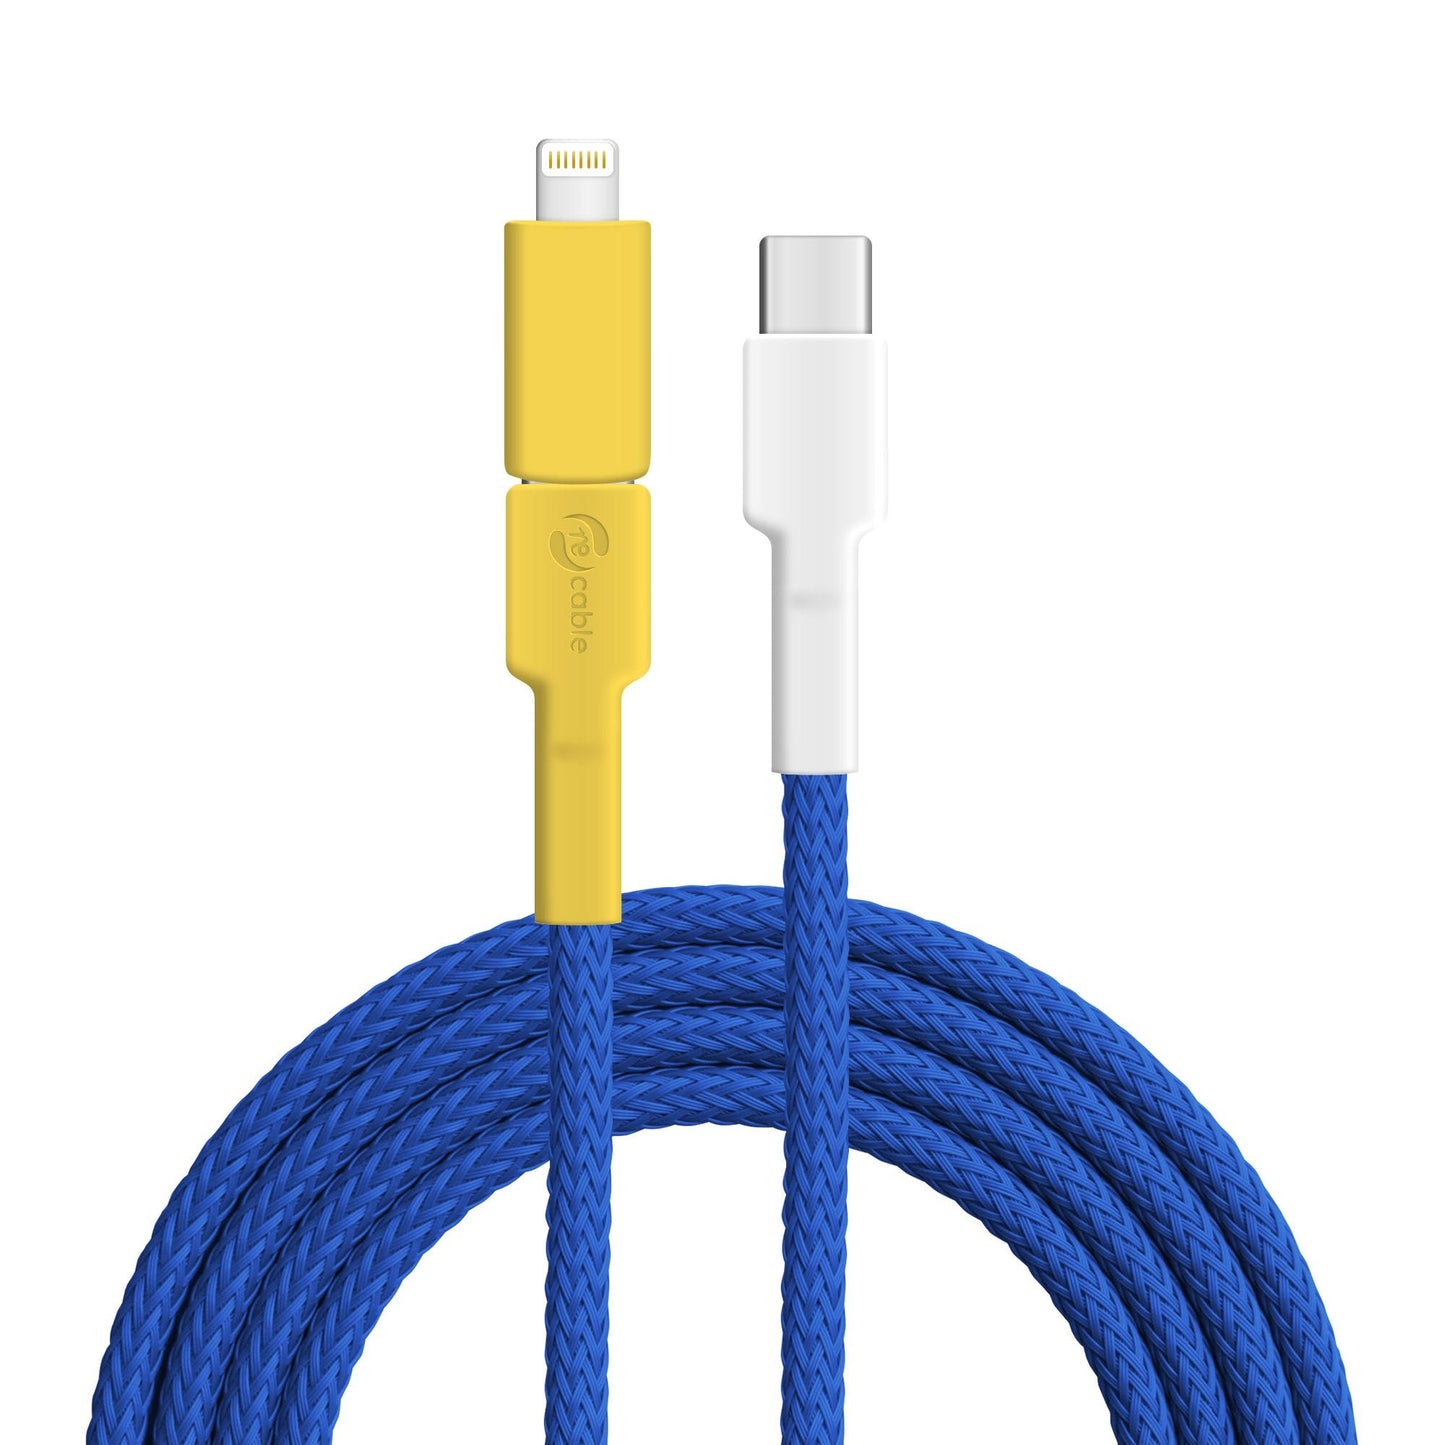 USB cable, Design: Blue tit, Connectors: USB C to USB C with Lightning adapter (connected)